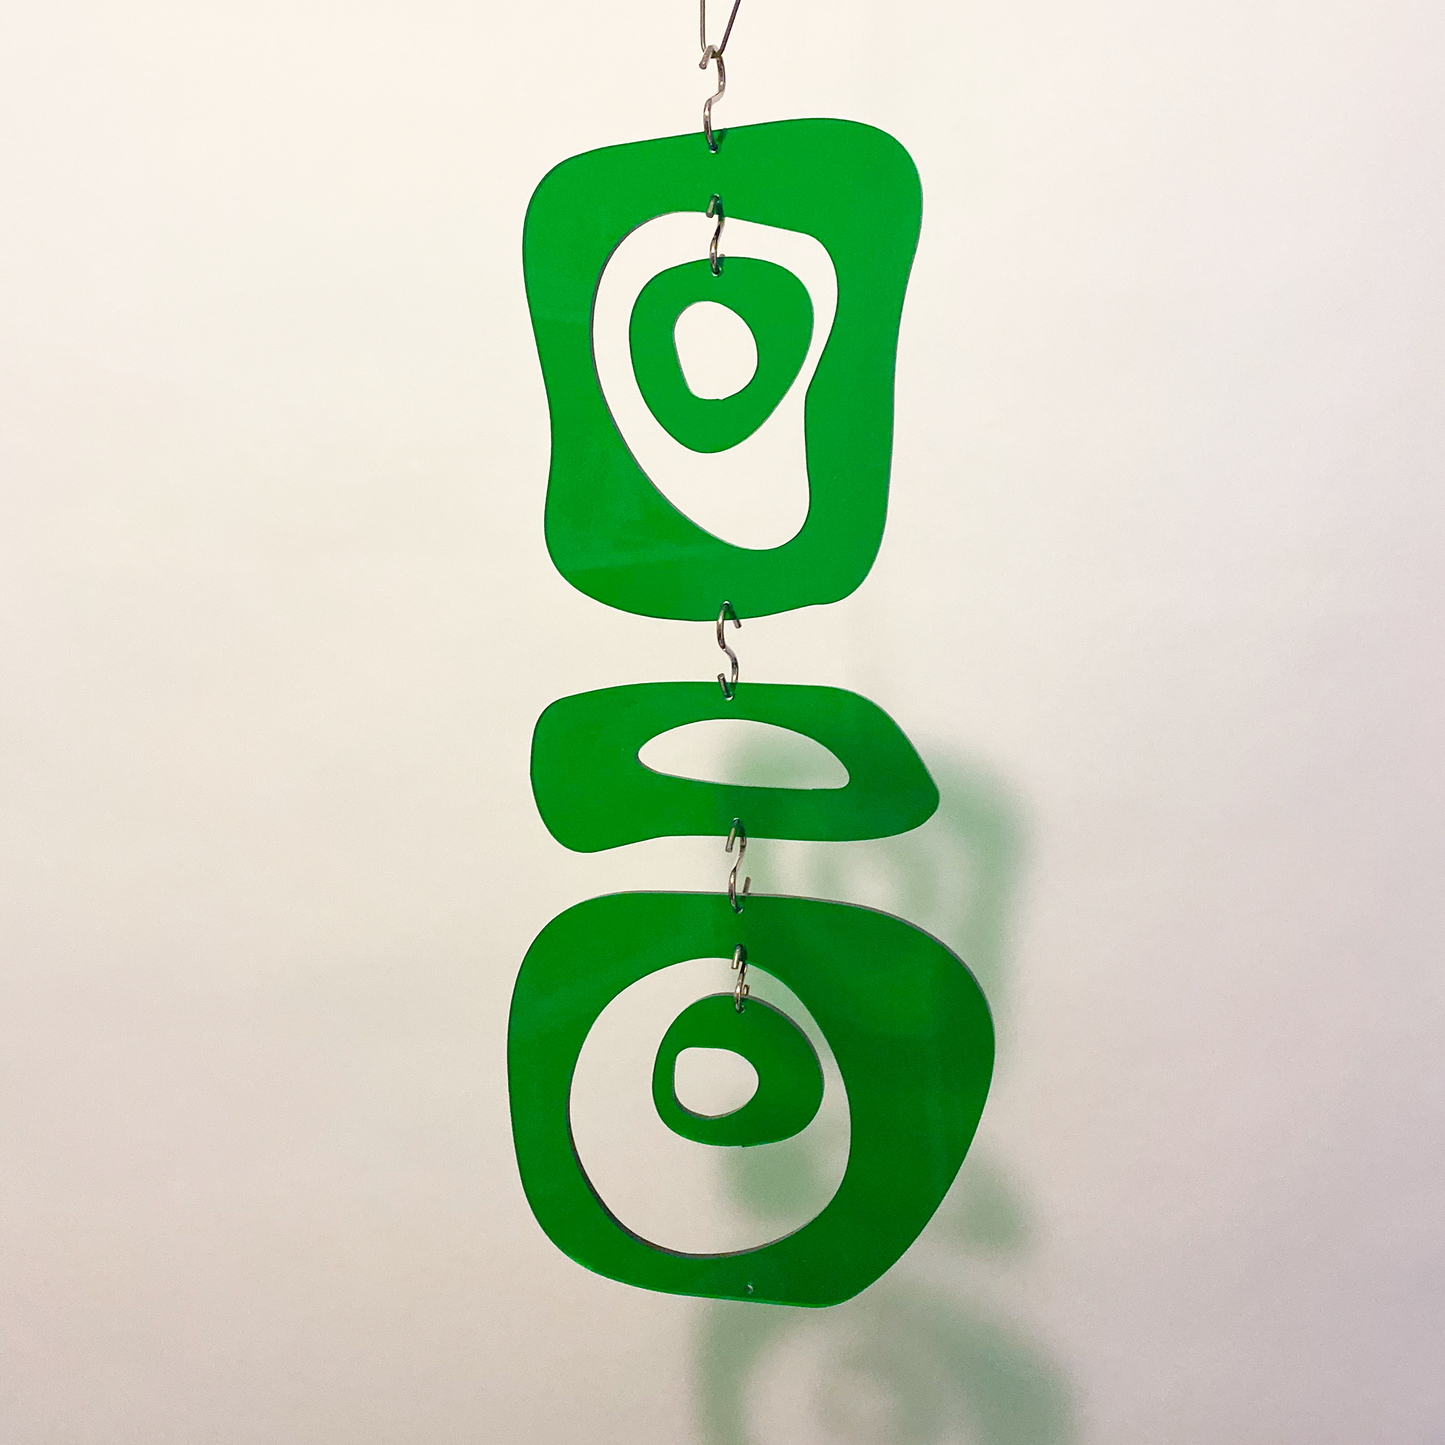 Green Retro-A-GoGo Christmas Decorations in Mid Century Modern Retro Style by AtomicMobiles.com